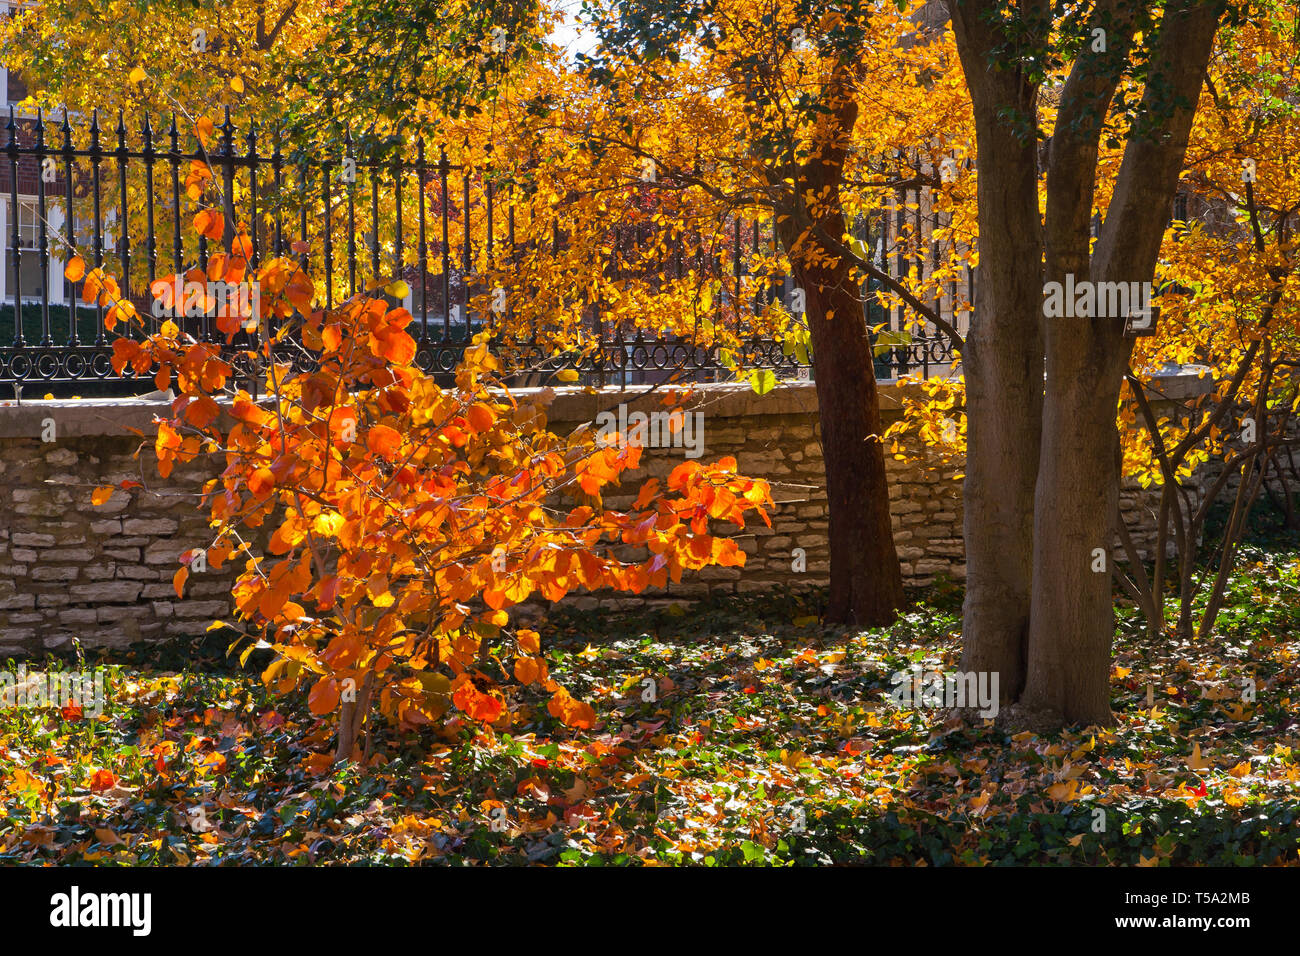 Witch hazel bush with orange autumn foliage in front of a fence at the Missouri Botanical Garden on a November morning. Stock Photo